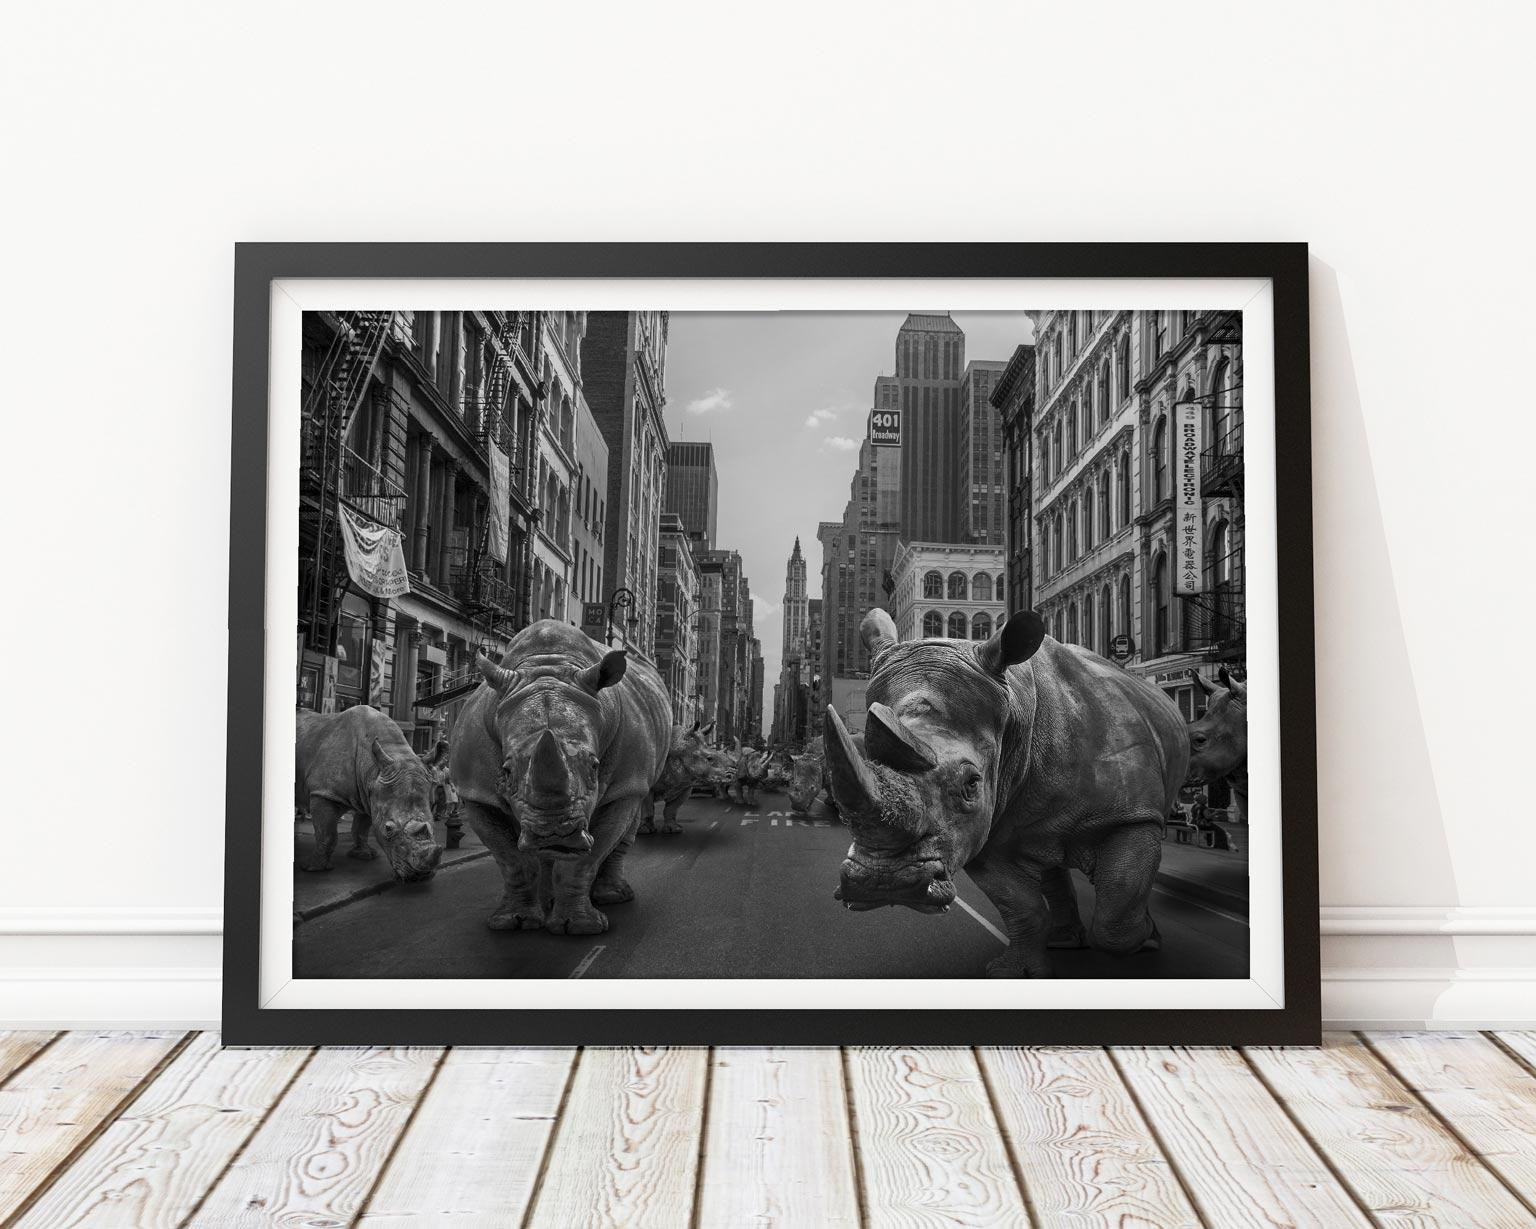 Title: Rhinos at home in New York
Limited Edition Photographic Print

Limited-Edition Illustration Print Artwork titled ‘Rhinos at home in New York’ by artists Gillie and Marc. This is a realistic juxtaposed artwork available in limited-edition